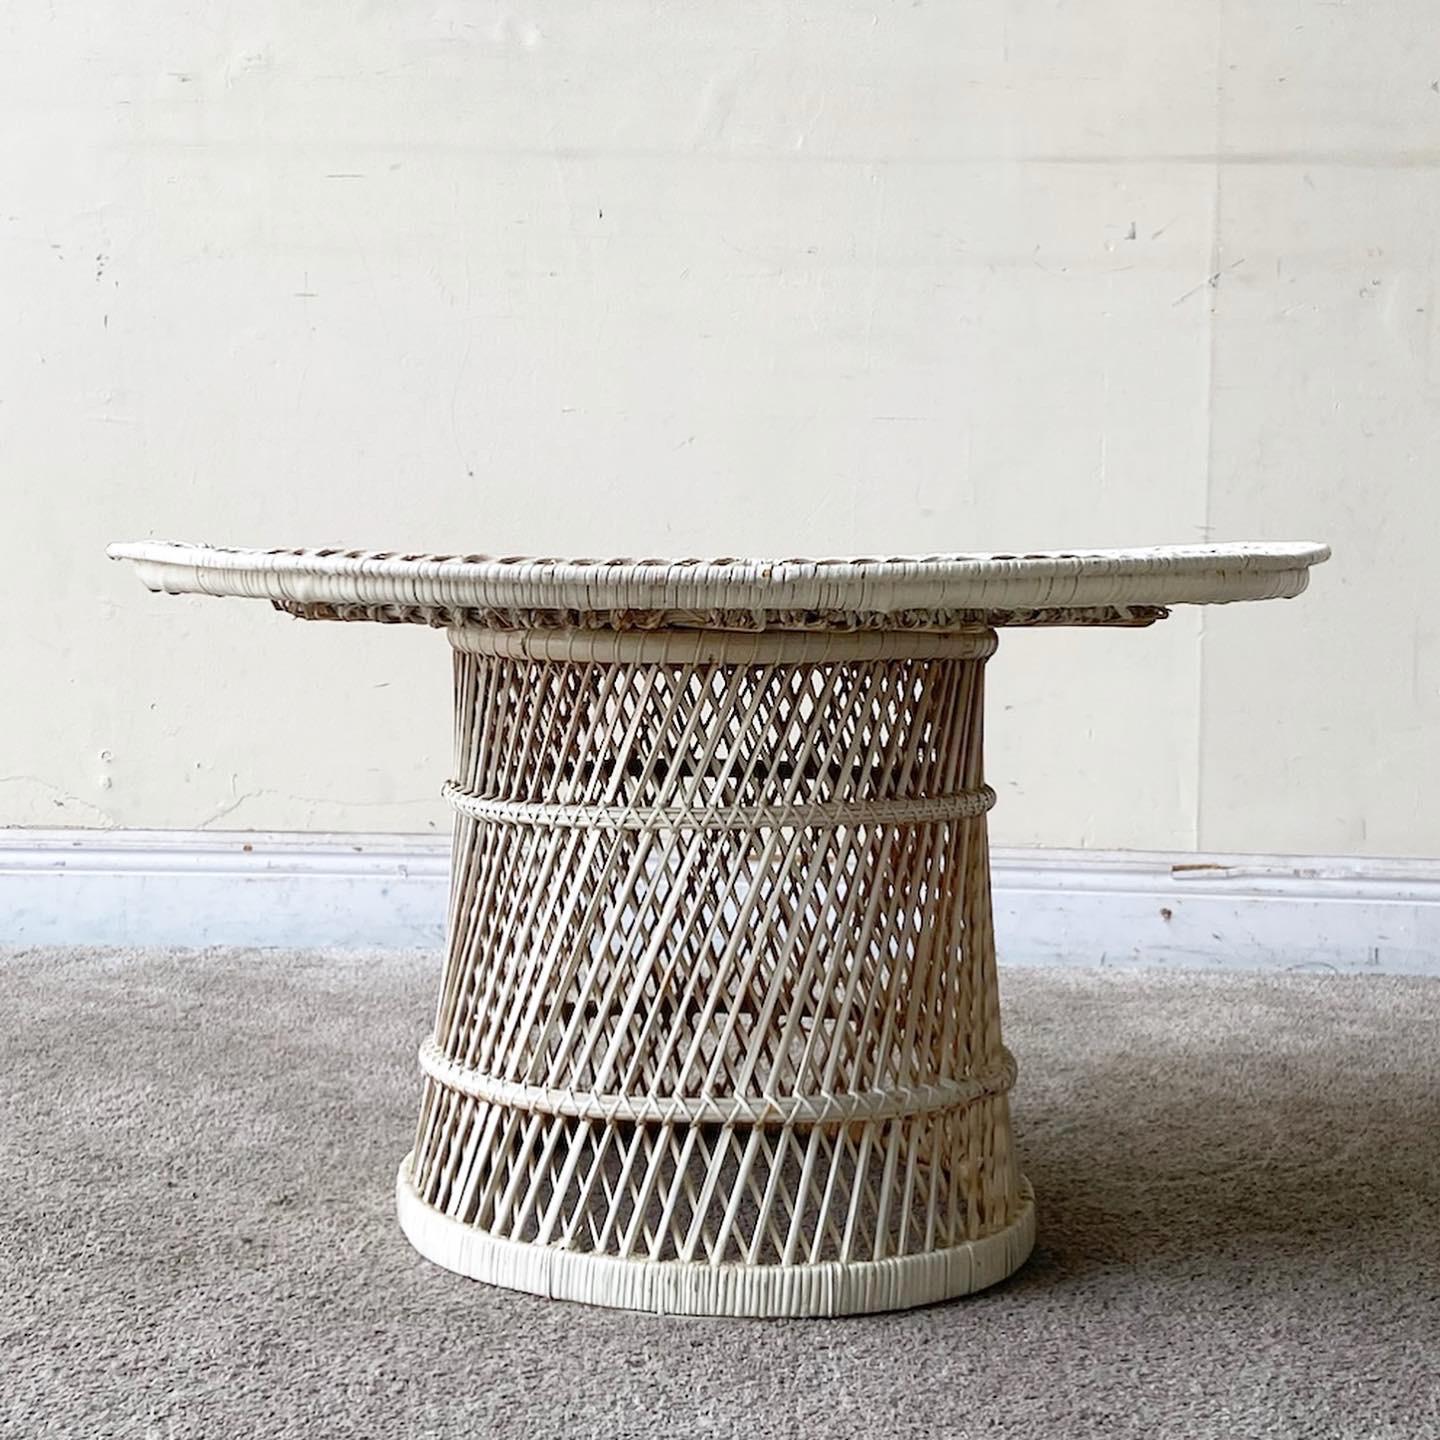 Incredible boho chic wicker and rattan coffee table. Features a fabulous woven design with a circular glass top.

Additional information:
Material: Rattan, Wicker
Color: White
Style: Boho Chic
Time Period: 1980s
Dimension: 30.5